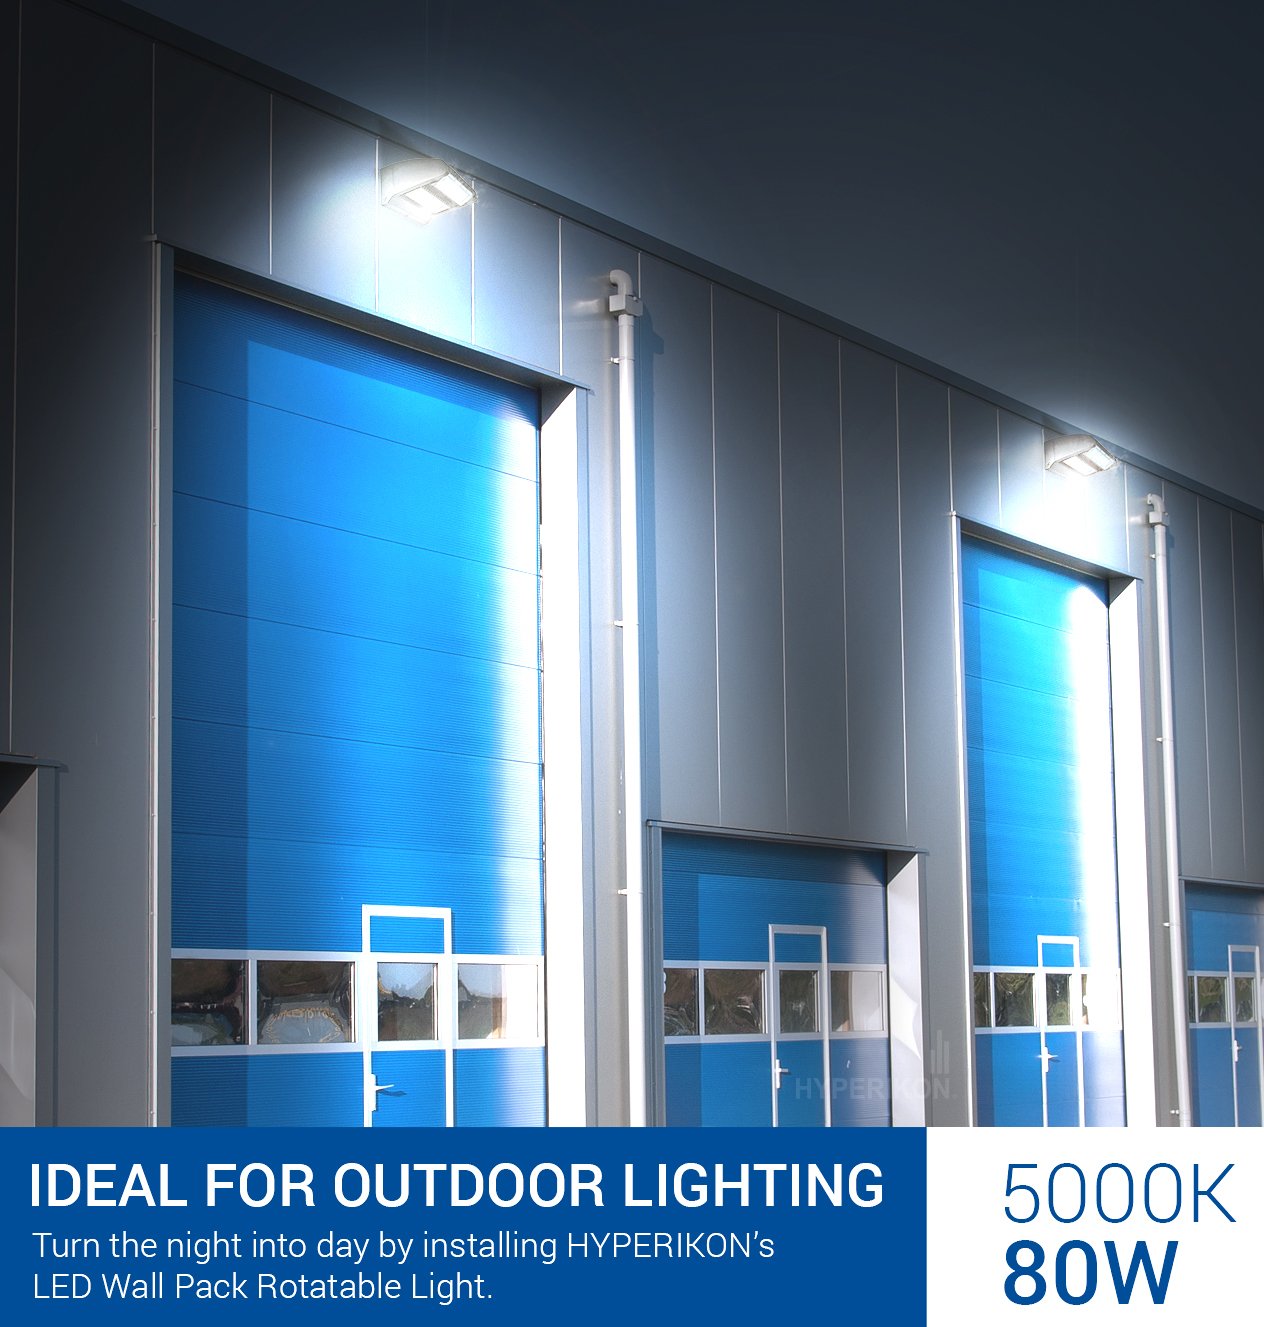 80W LED Rotatable Wallpack Light-10,400Lumens-5000K-DLC UL Listed-5 Years Warranty